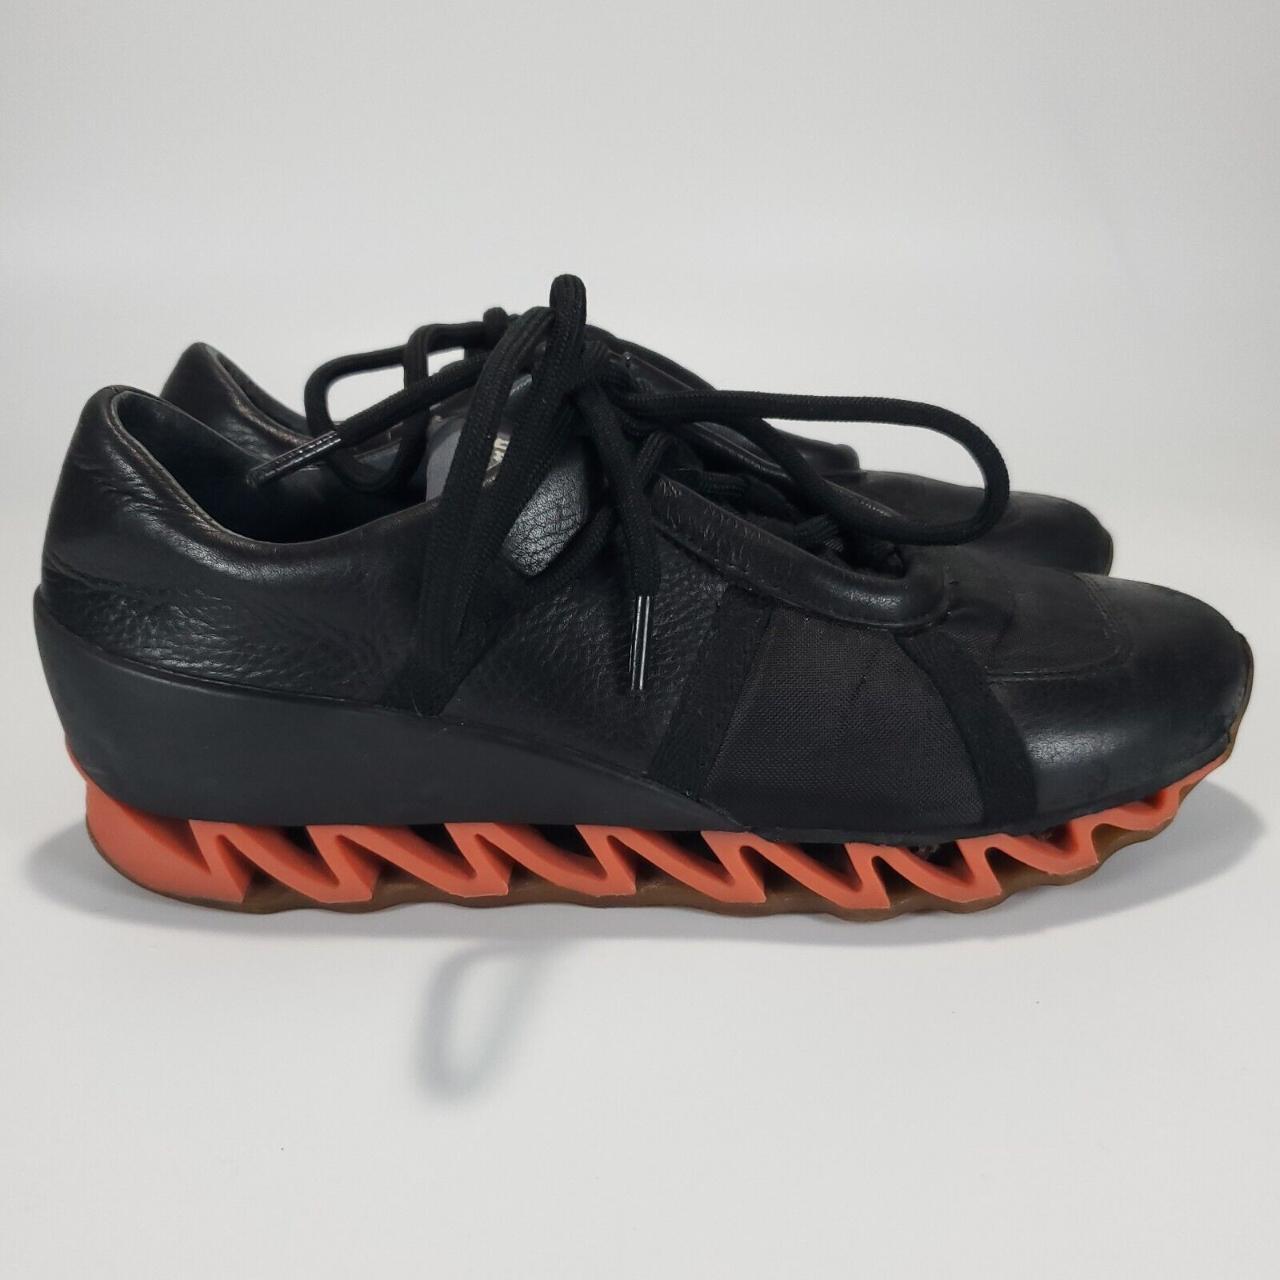 Camper Men's Black and Red Trainers